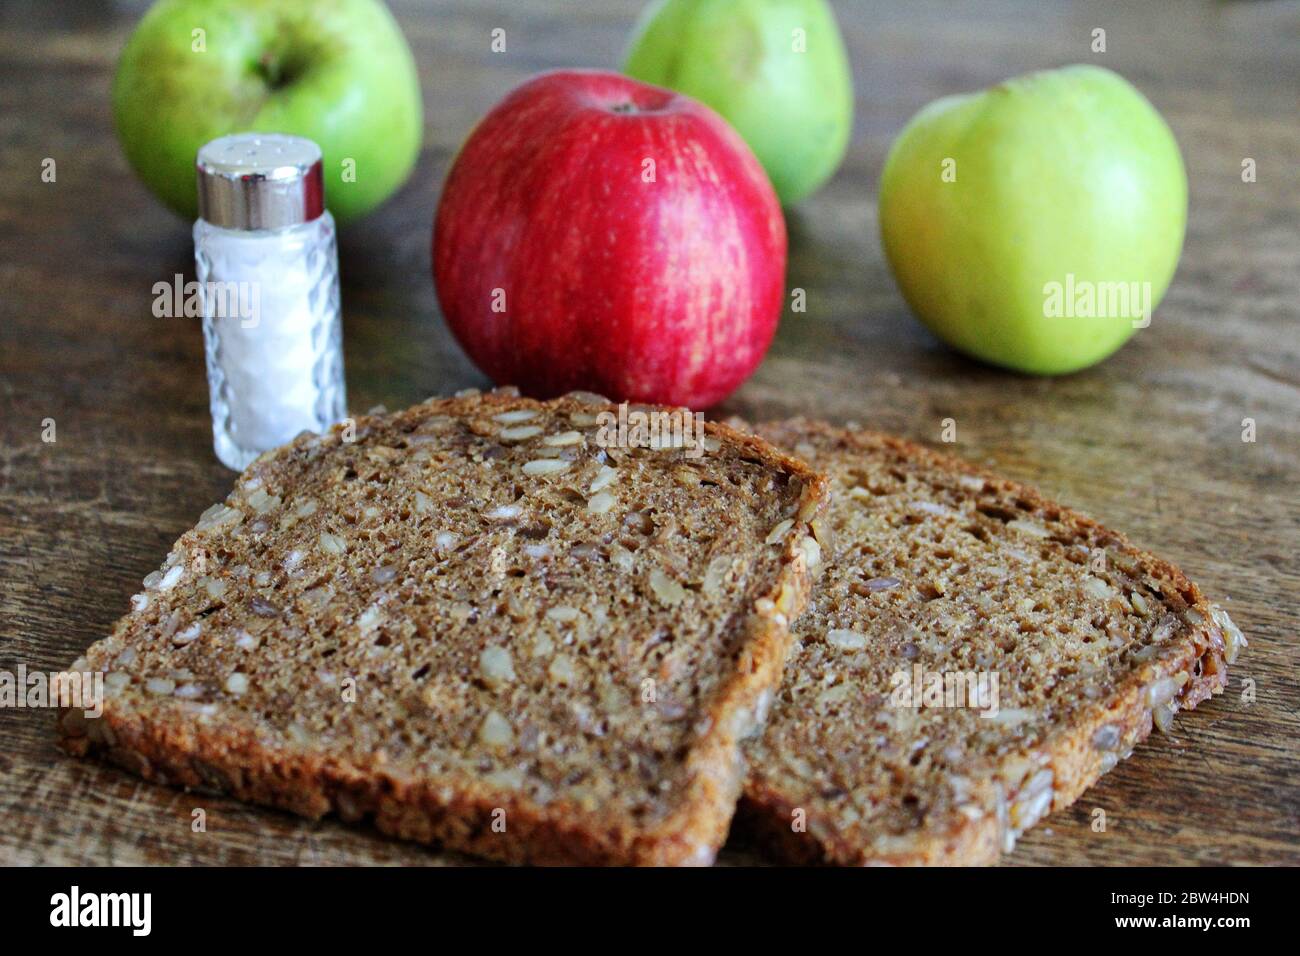 Bread with corn and salt and apples on a table Stock Photo